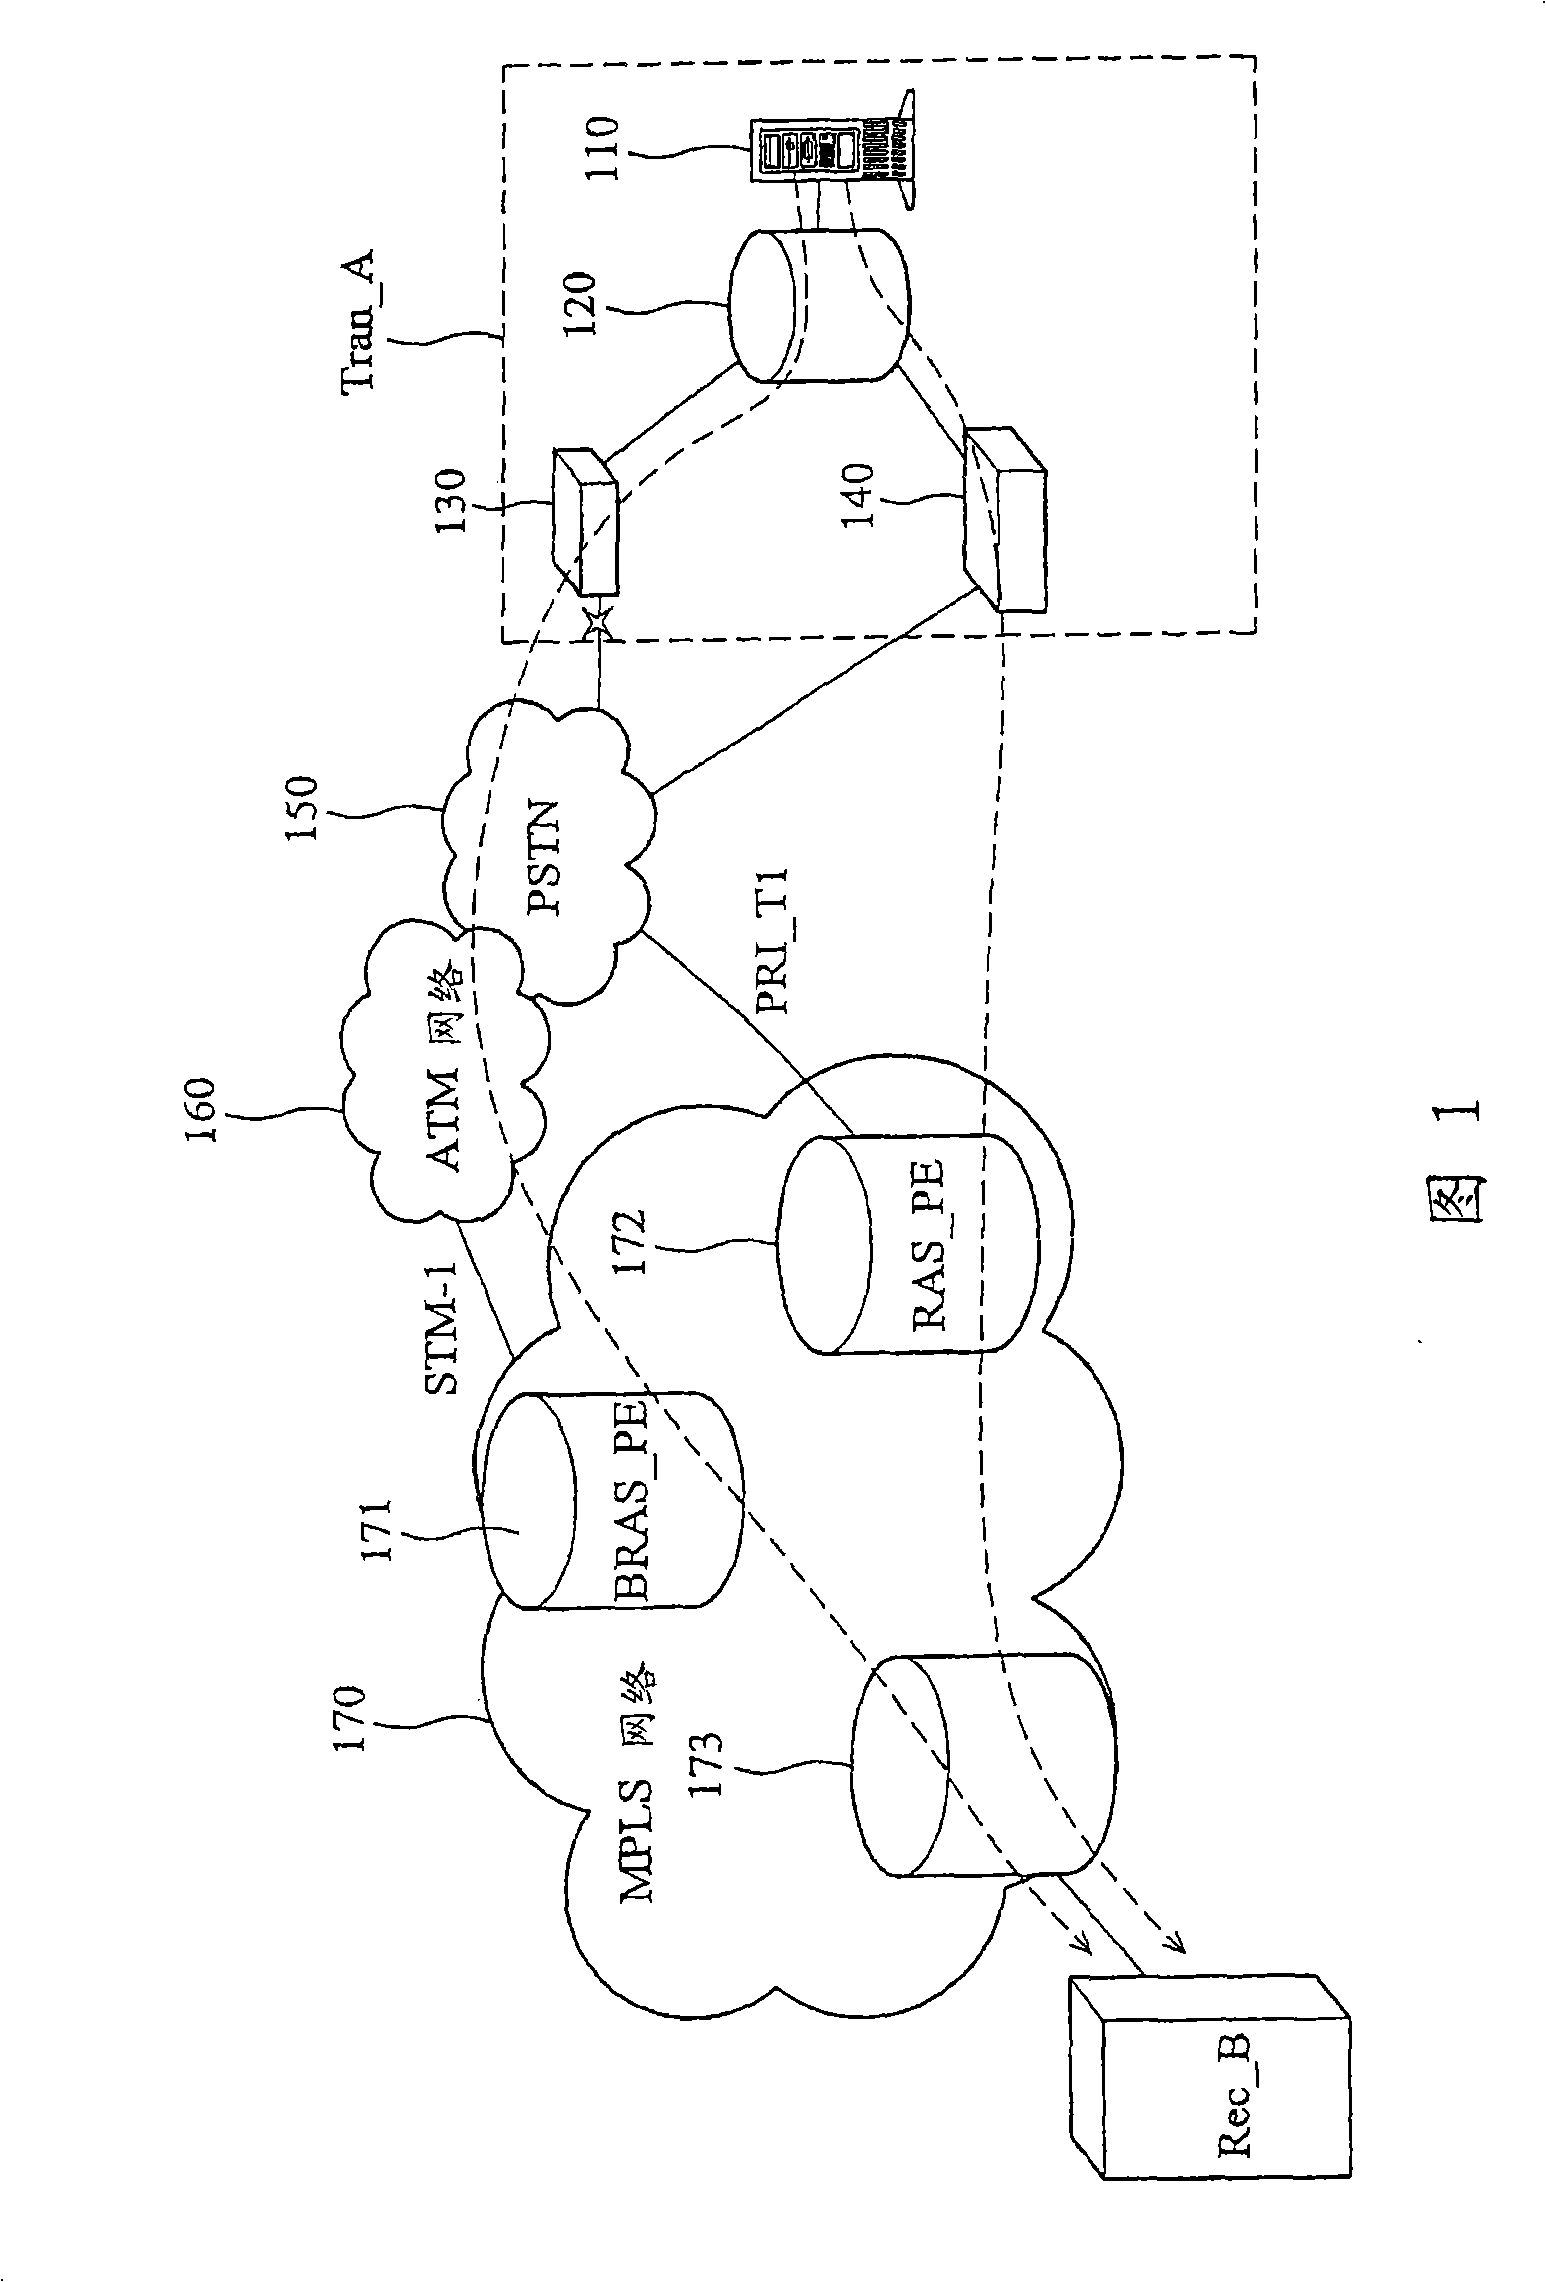 Redundant network system and its processing method